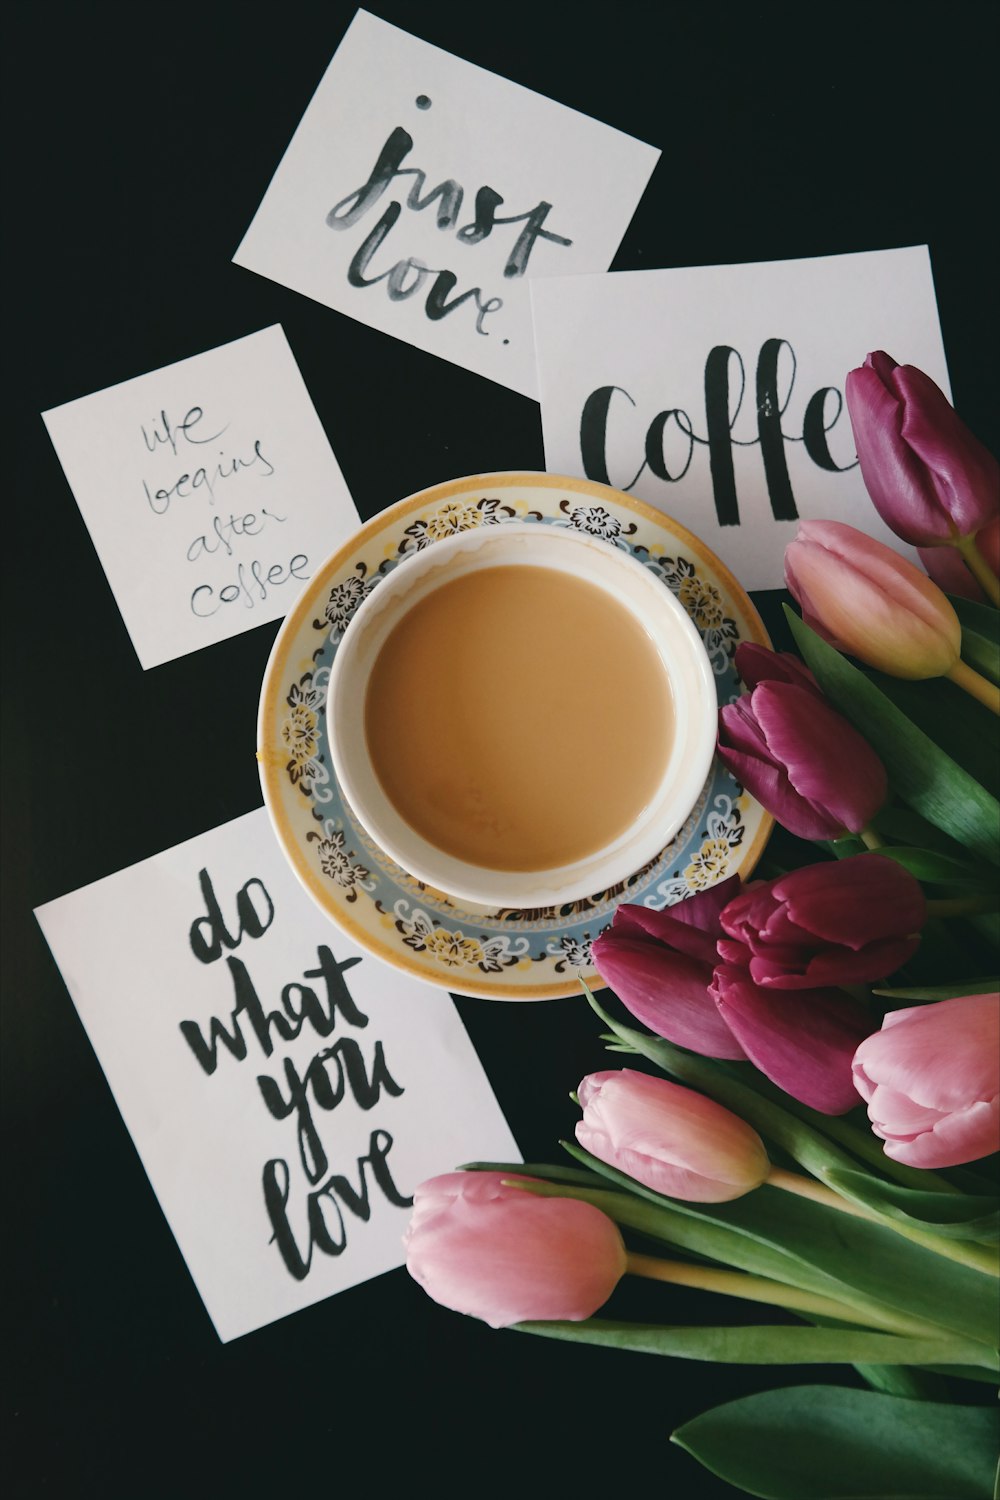 Motivational notes next to a cup of coffee.